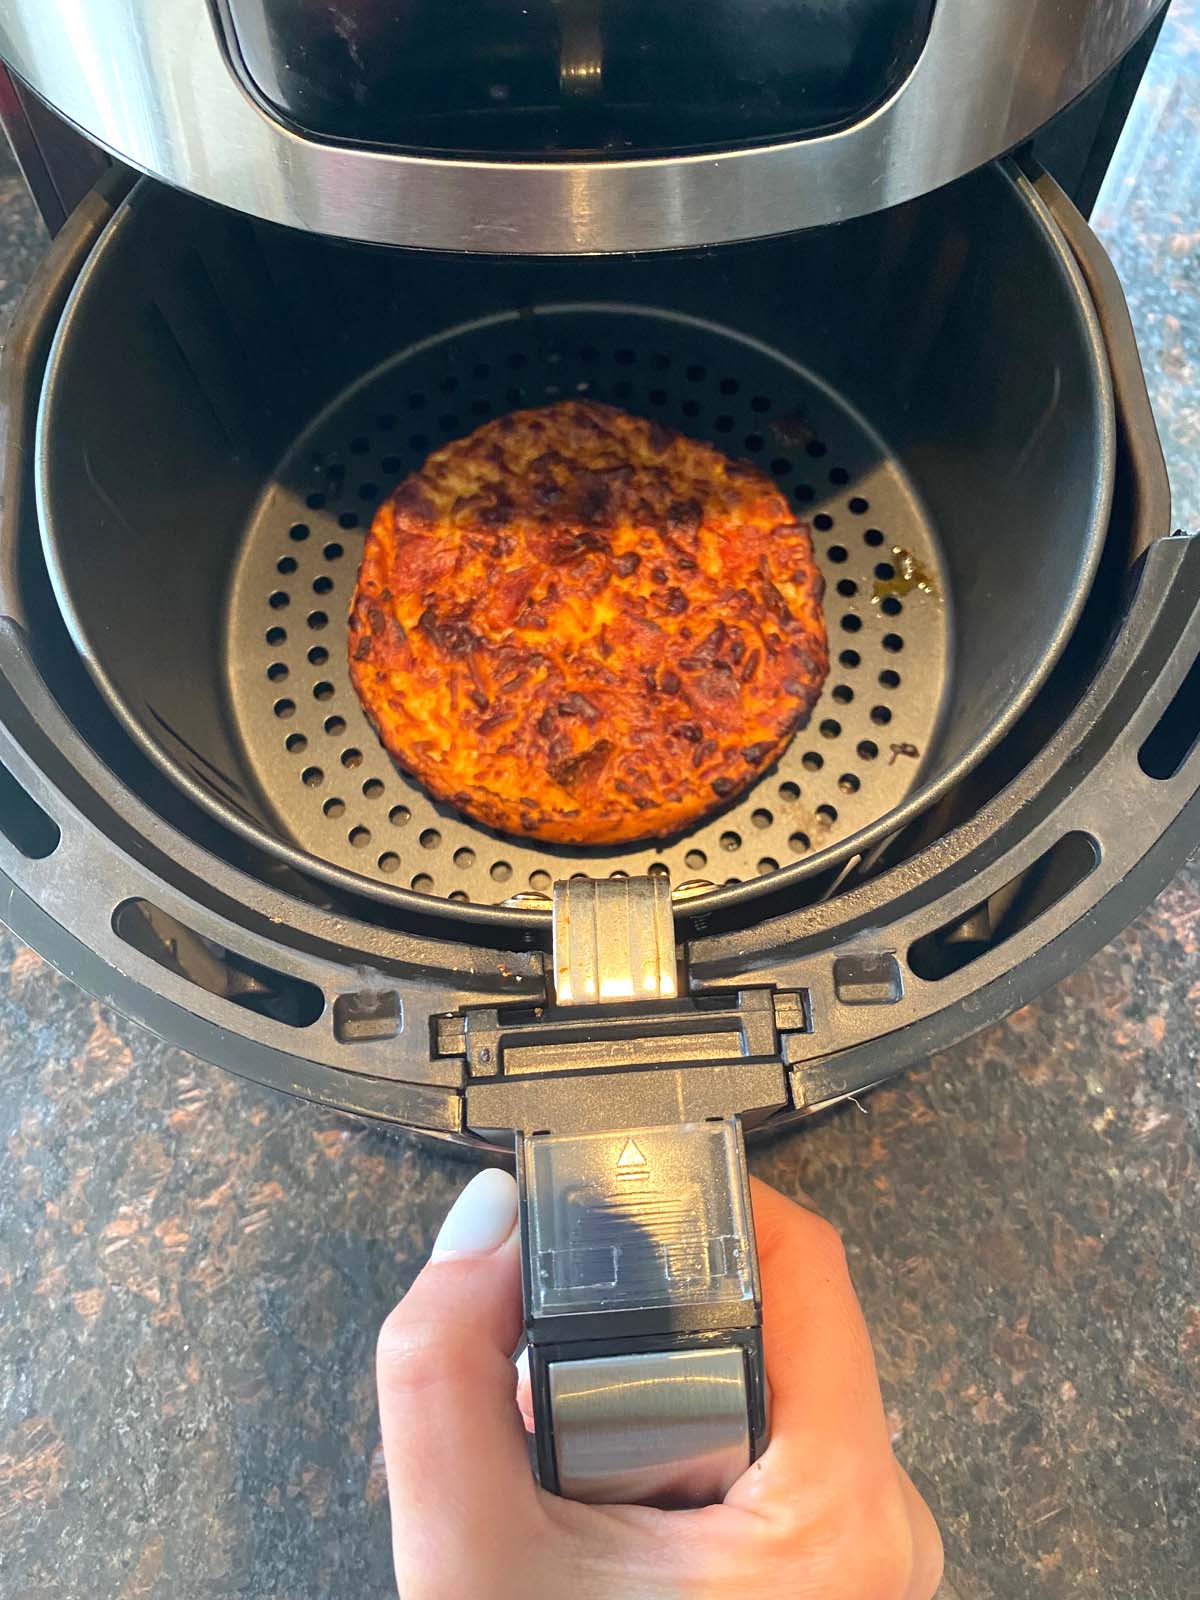 Single size deep dish frozen pizza in air fryer basket with hand inserting into machine.